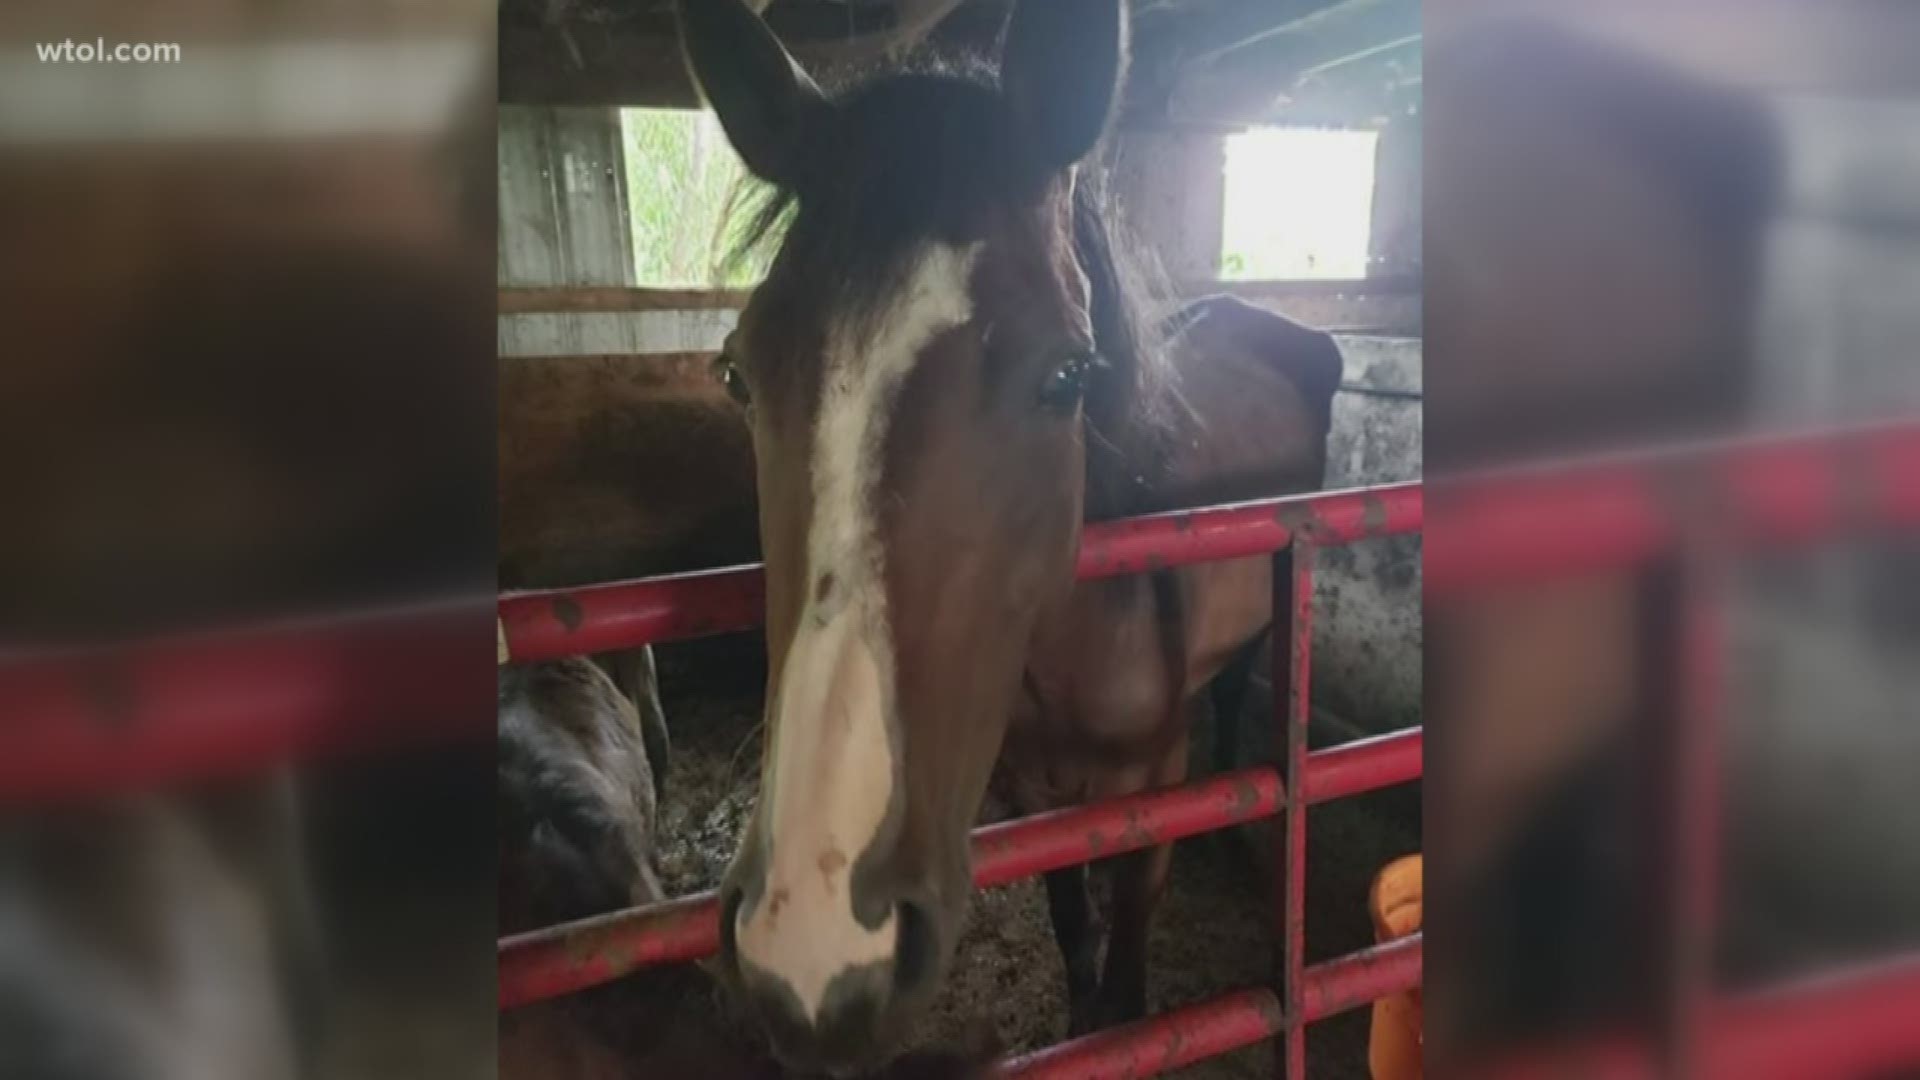 The humane society seized the animals from the woman's property in Republic, Ohio, and is asking for donations to help cover veterinary expenses.